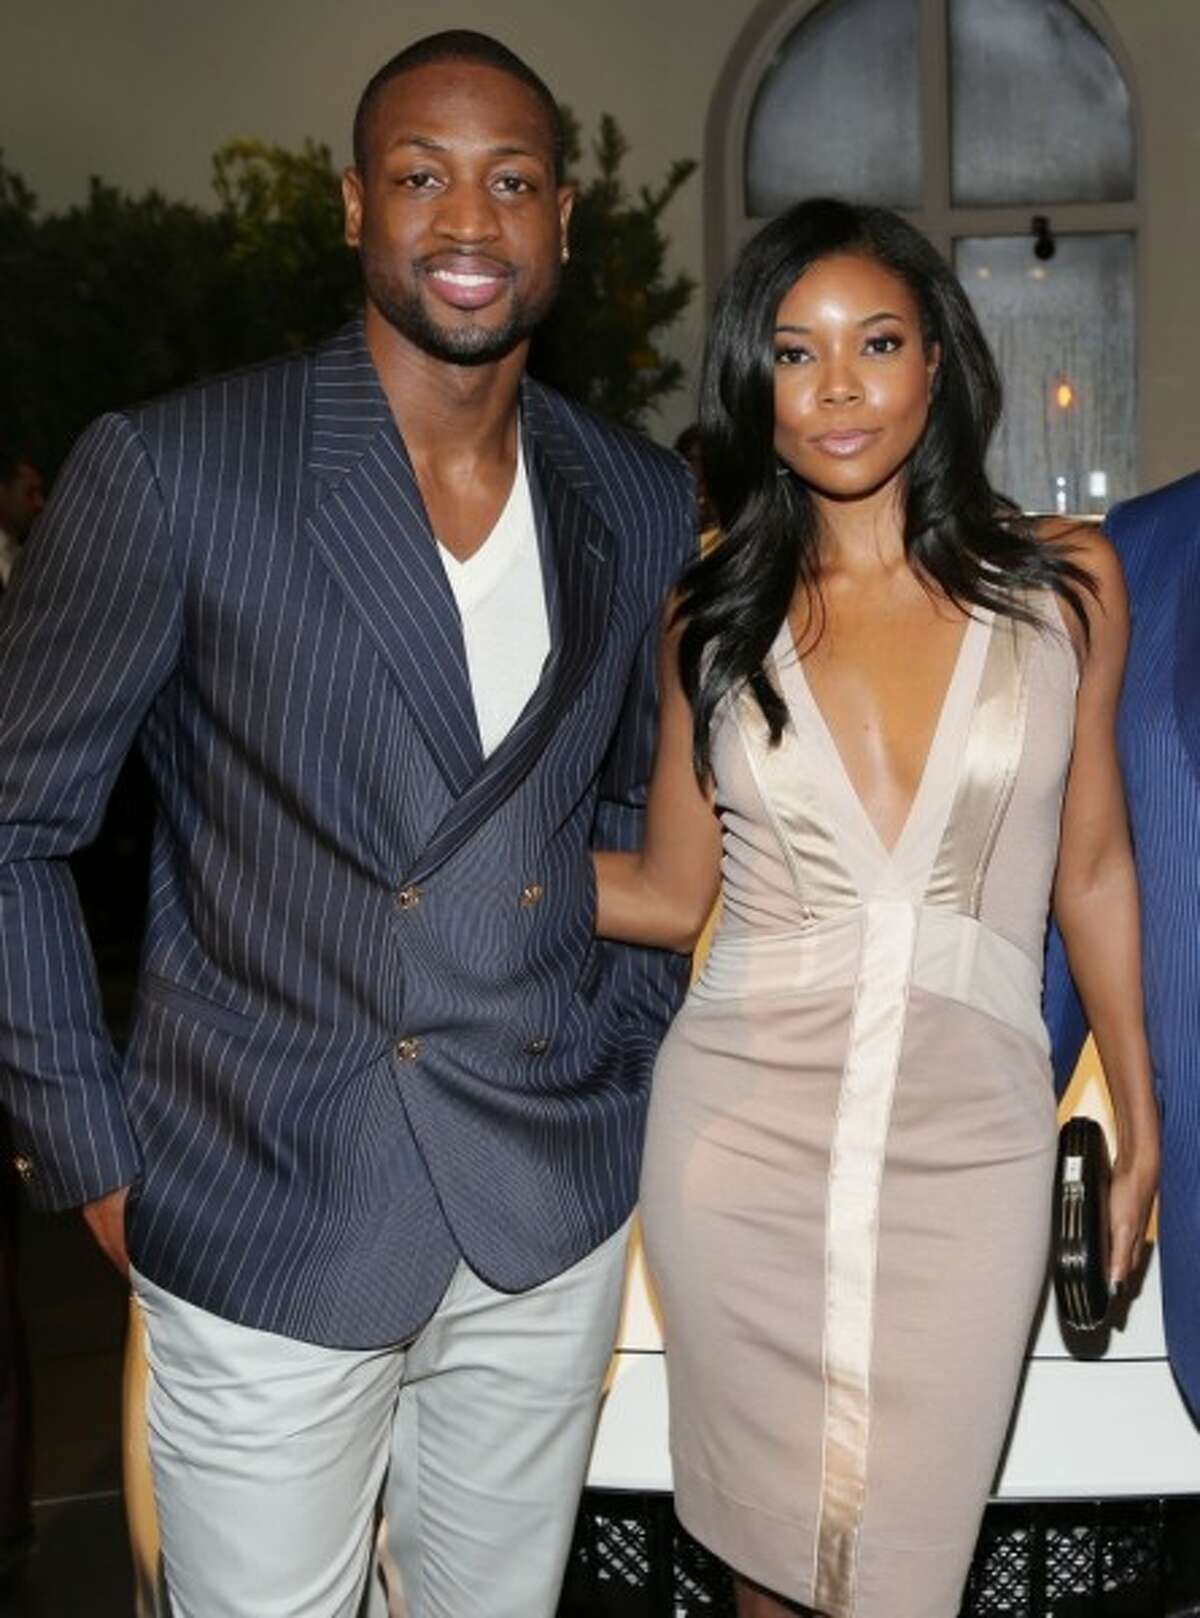 Gabrielle Union, NBA Heat star Dwyane Wade's actress wife took exception to TNT analyst Charles Barkley saying her husband didn't deserve to be an all-star in 2015.  She dissed Barkley with a rather strong Twitter burn, pointing out his lack of championships as a player: "Forgive Charles. .. Kenny Smith is a 2x champion & his opinion is most sound... it's like me talkin bout Meryl Streep but I ain't won nuthin."